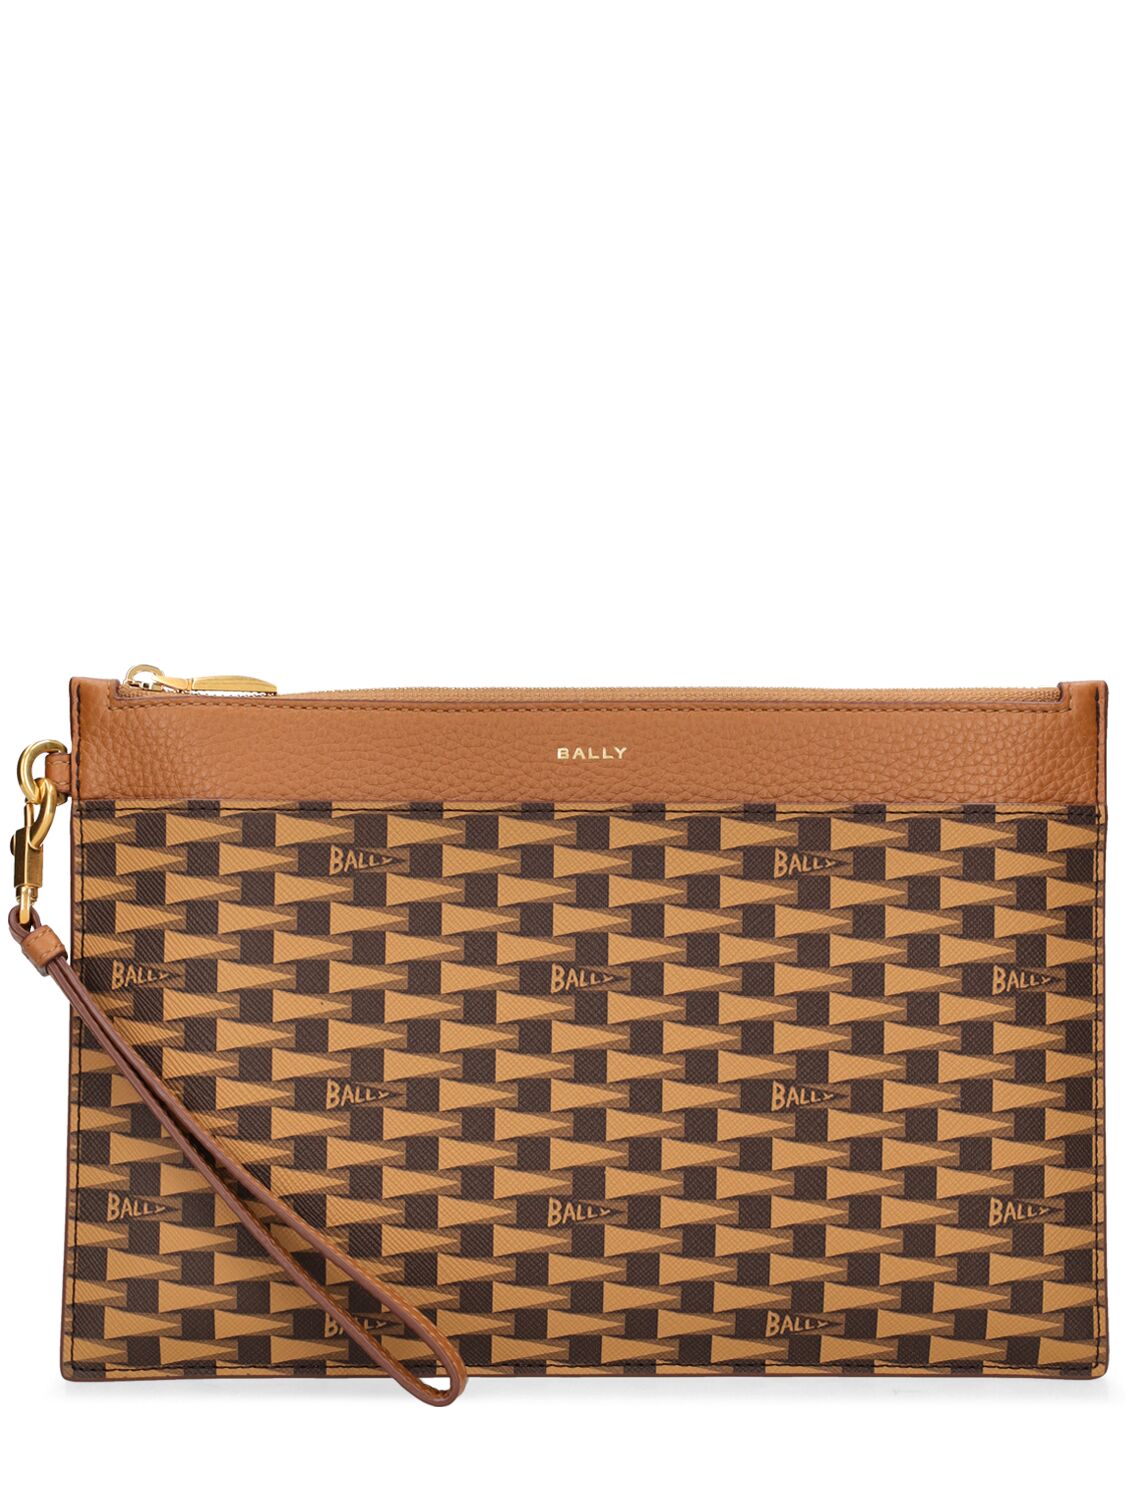 Bally Panelled Leather Clutch Bag - Blue